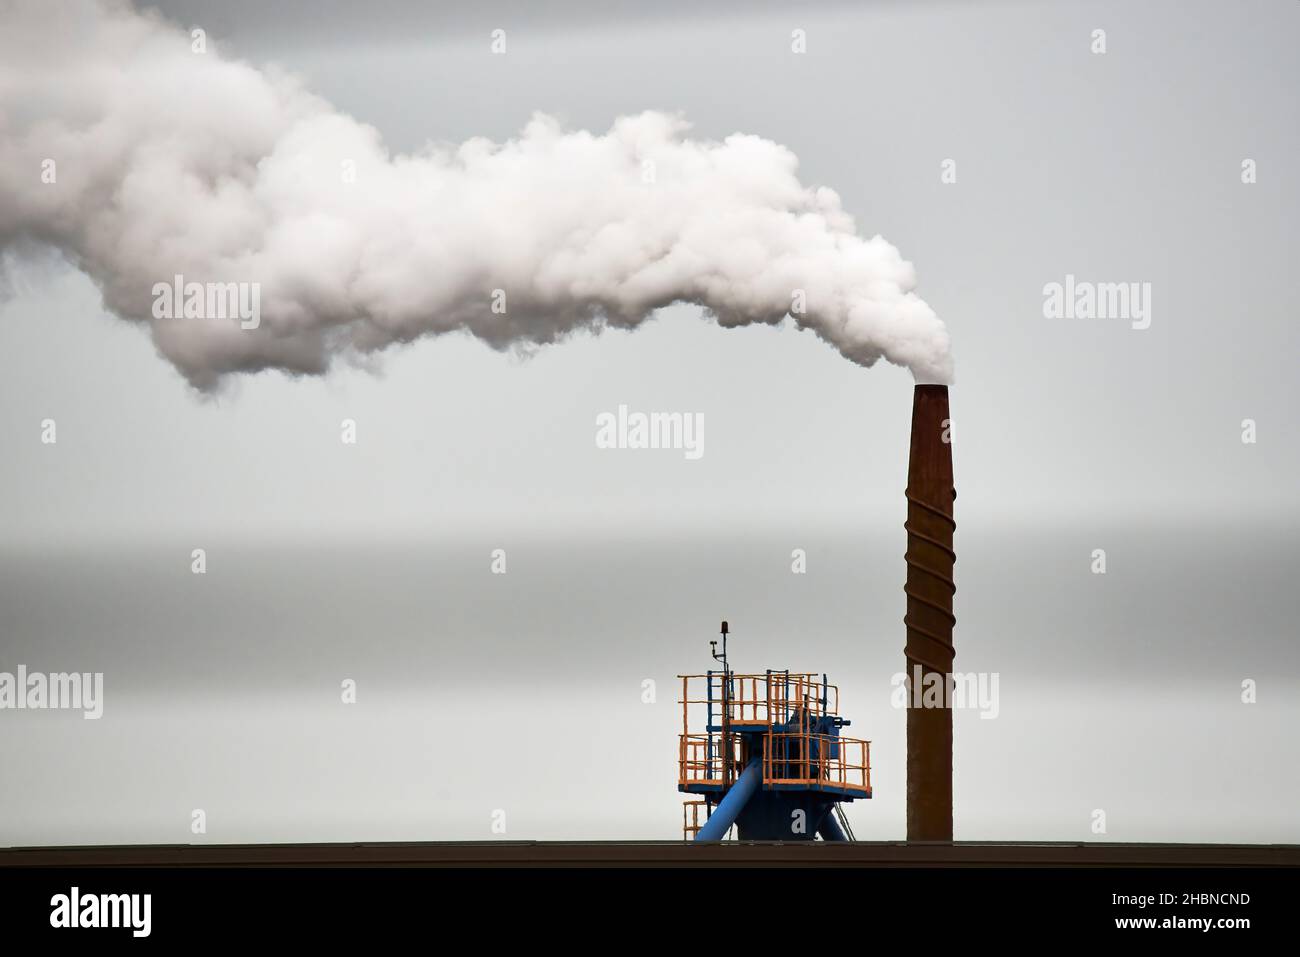 Harmful emissions from the plant chimney Stock Photo